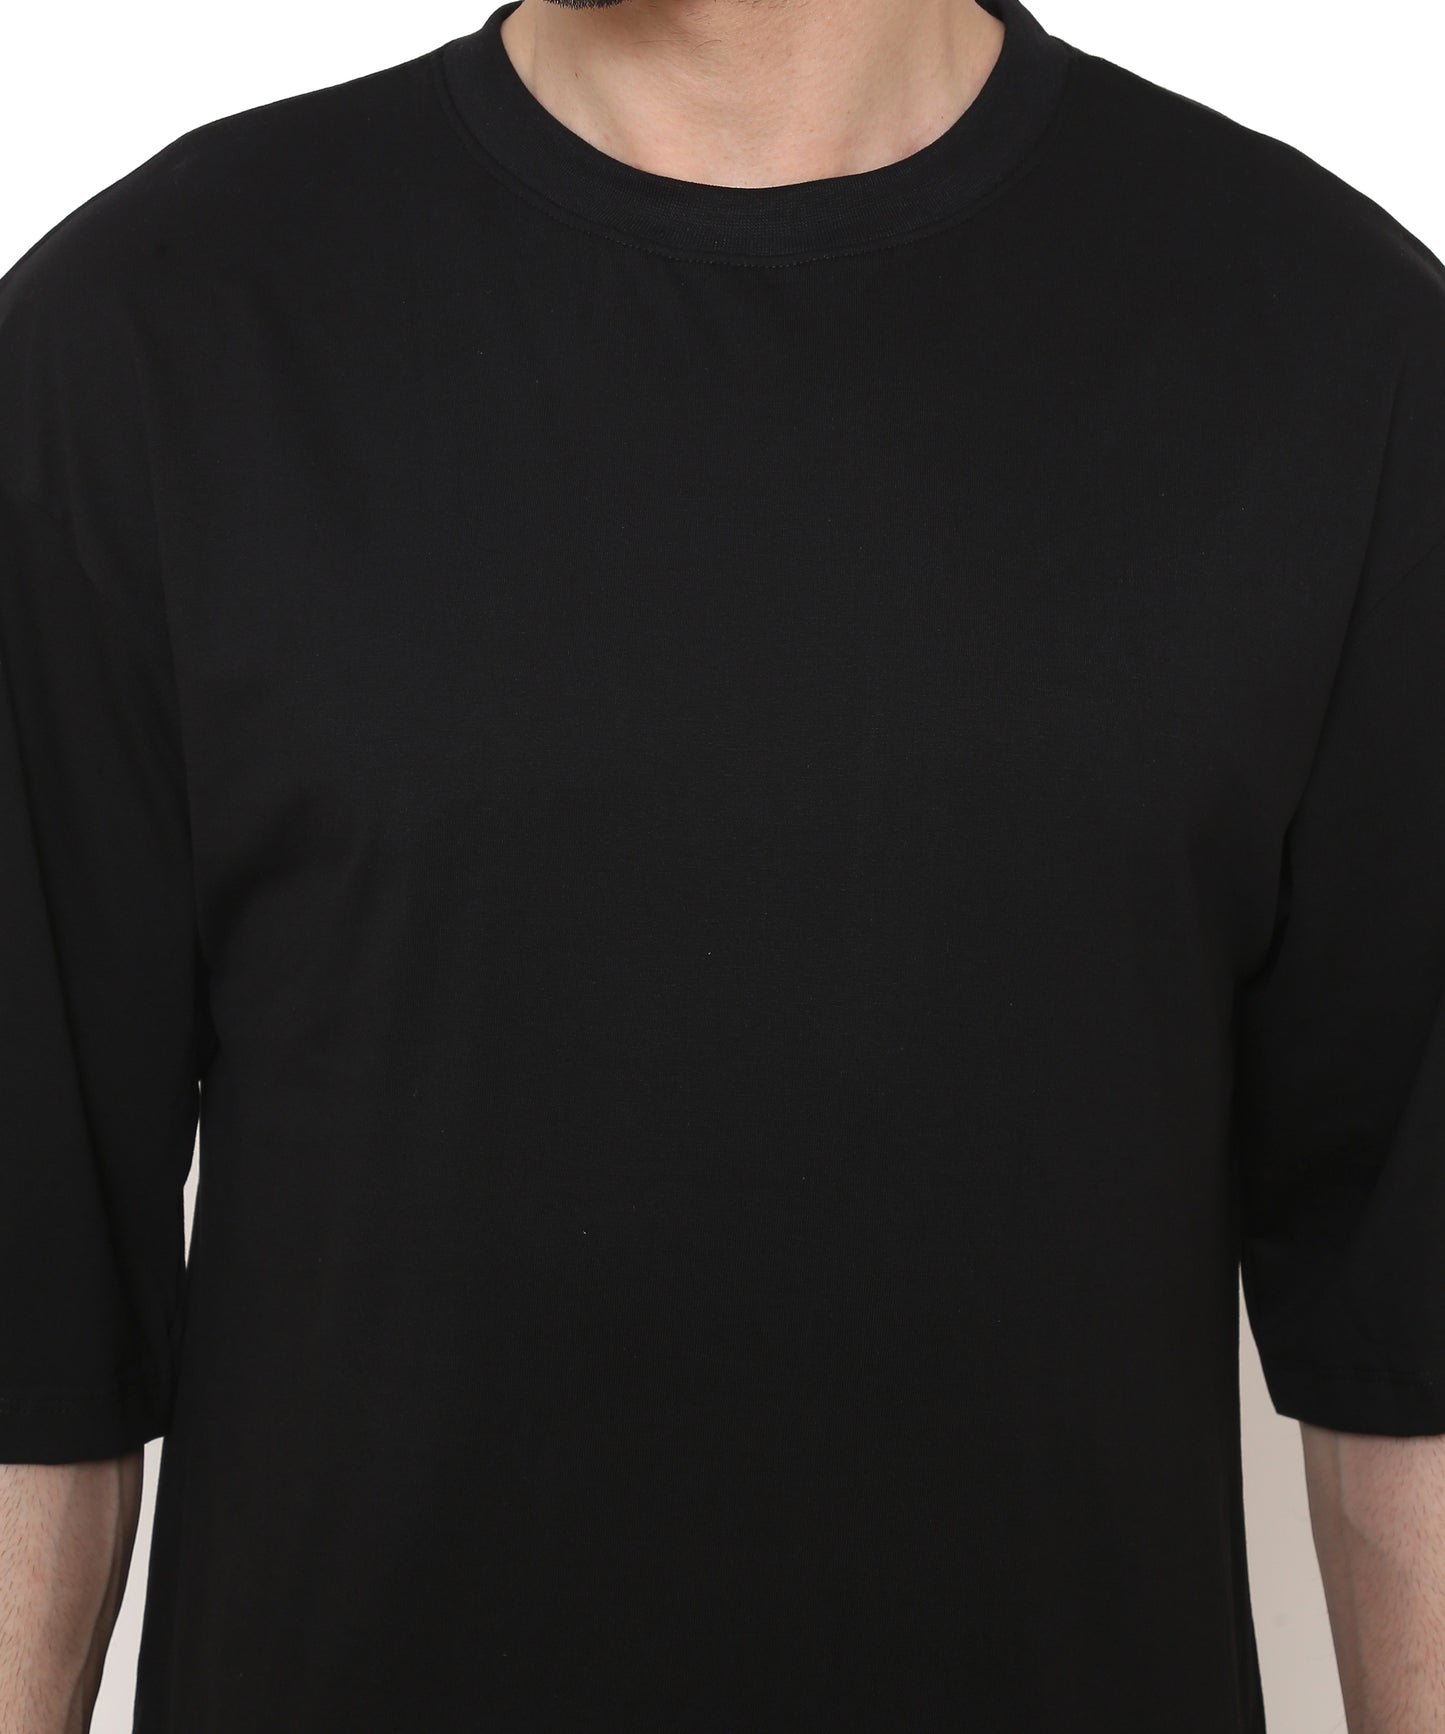 Black Oversized Cotton T-shirts Relaxed Fit Tees for Men